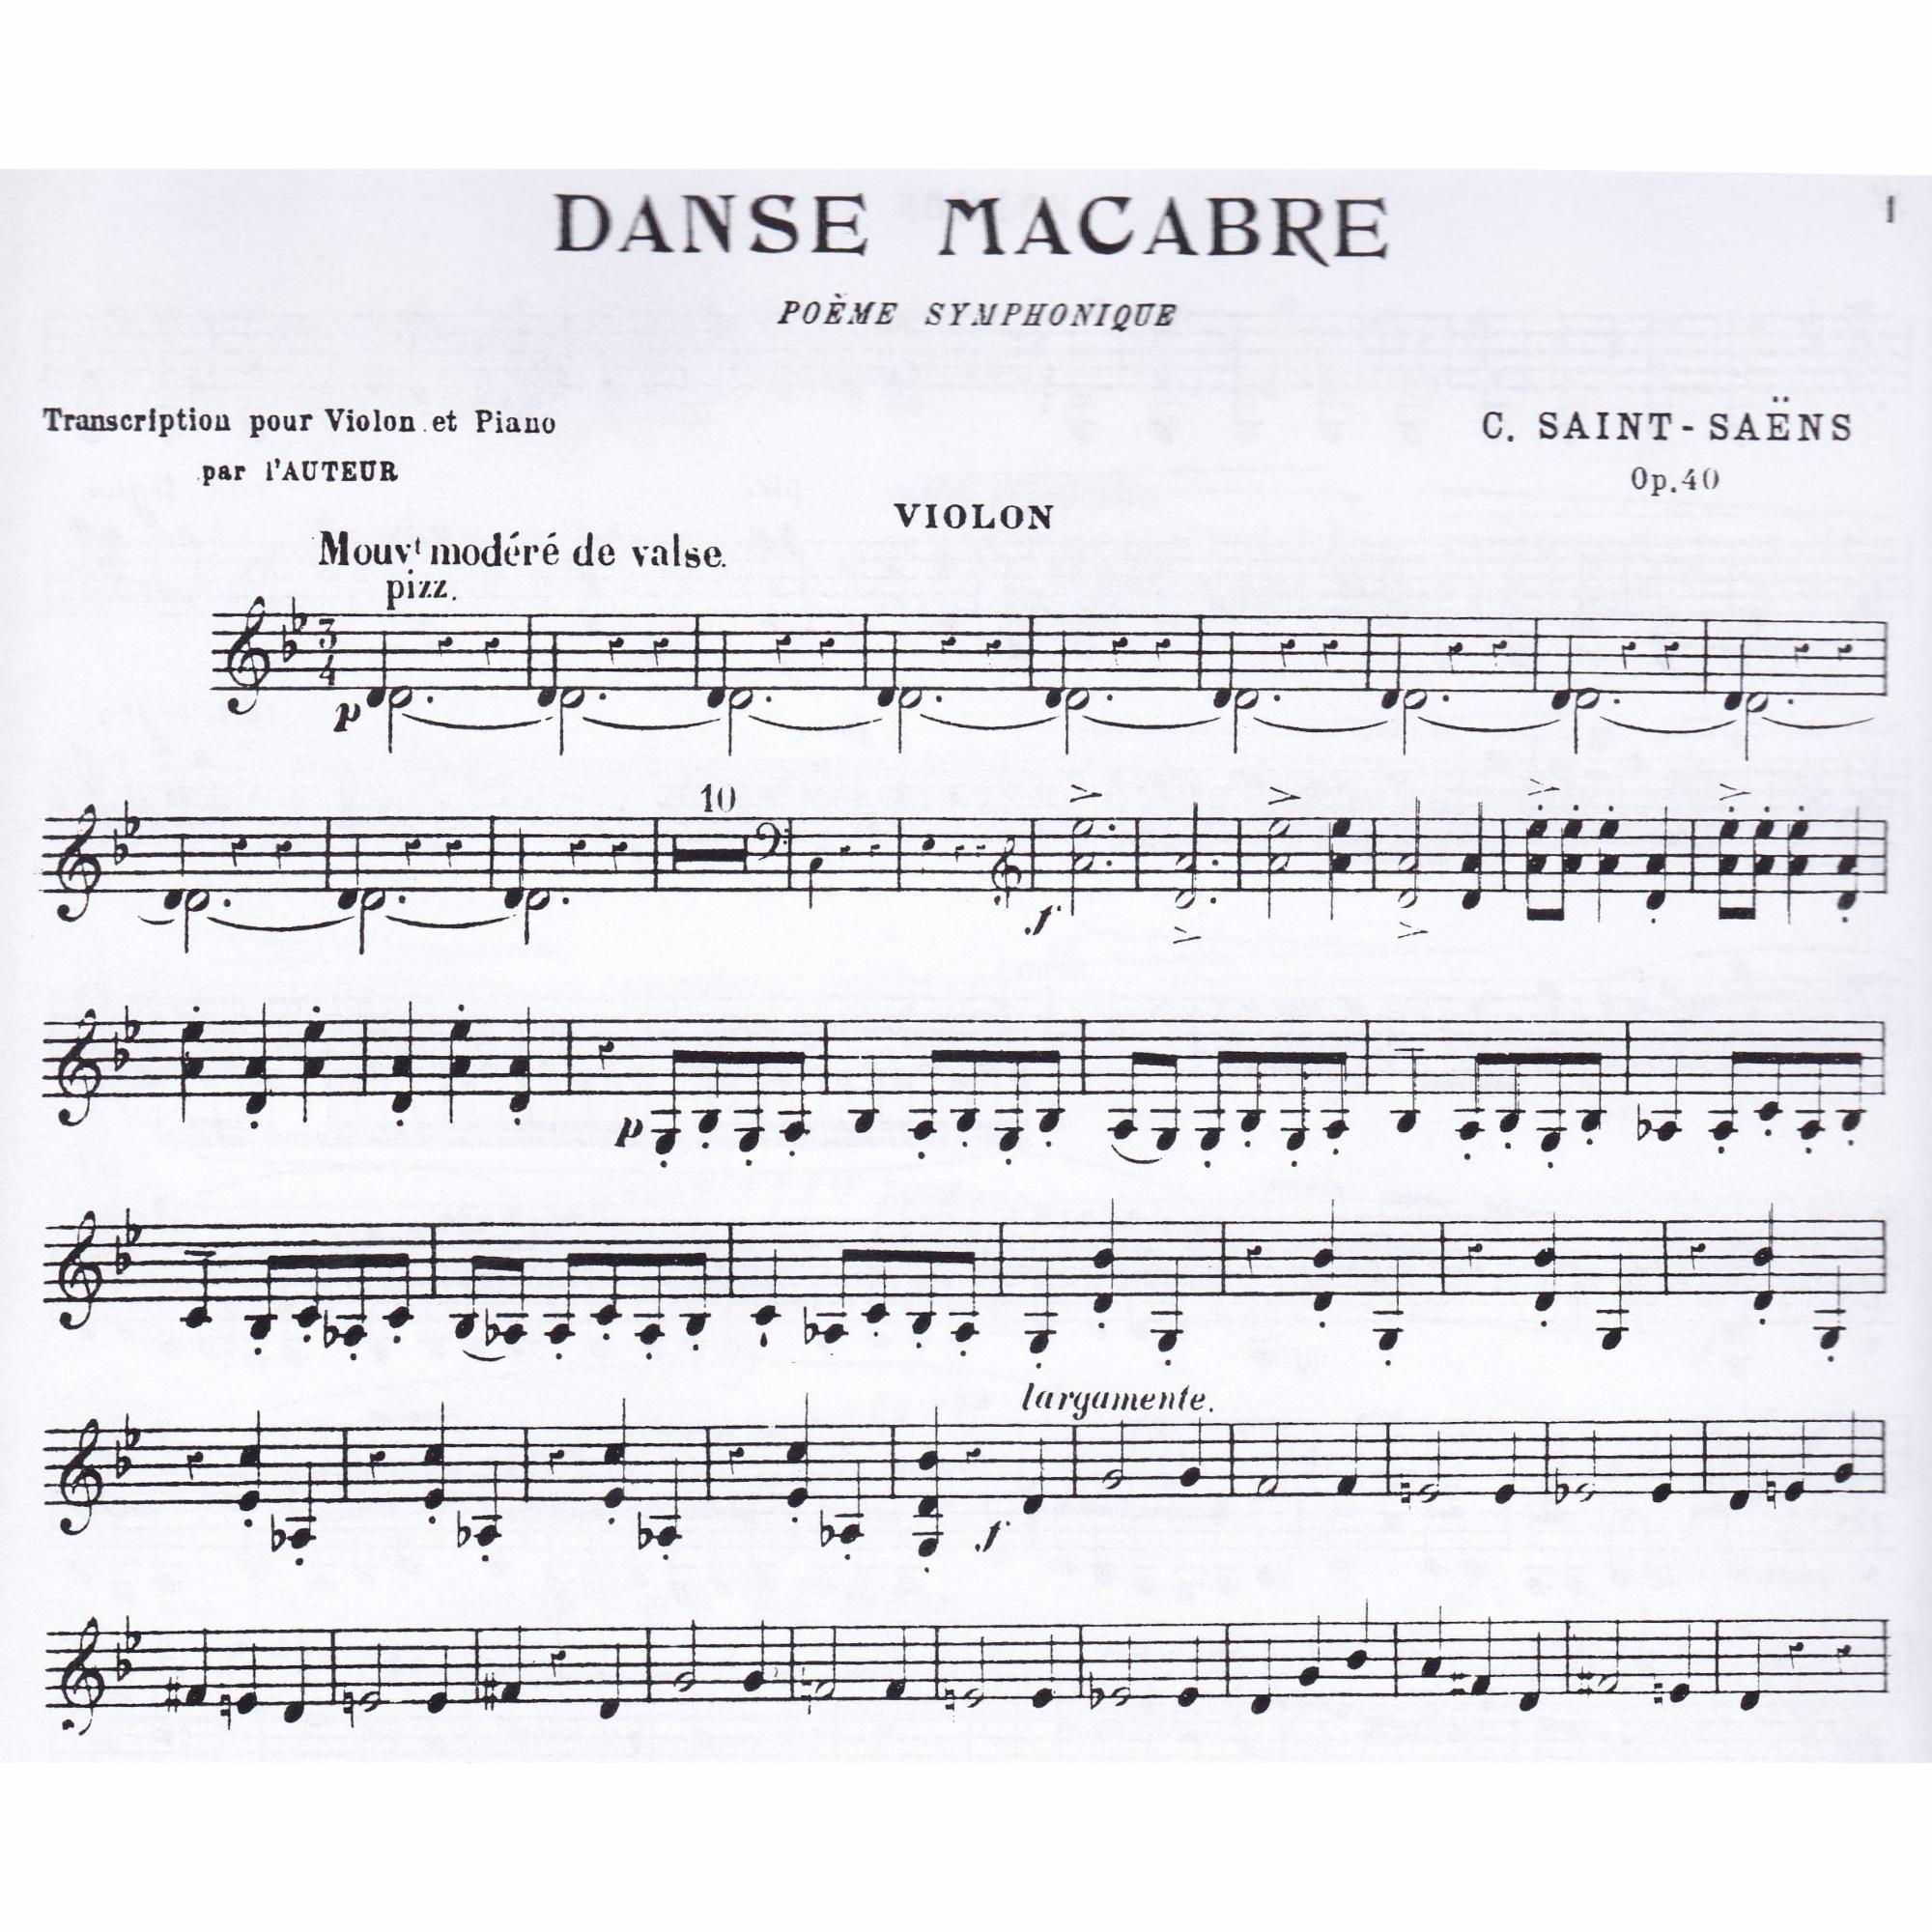 Danse Macabre for Violin and Piano, Op. 40